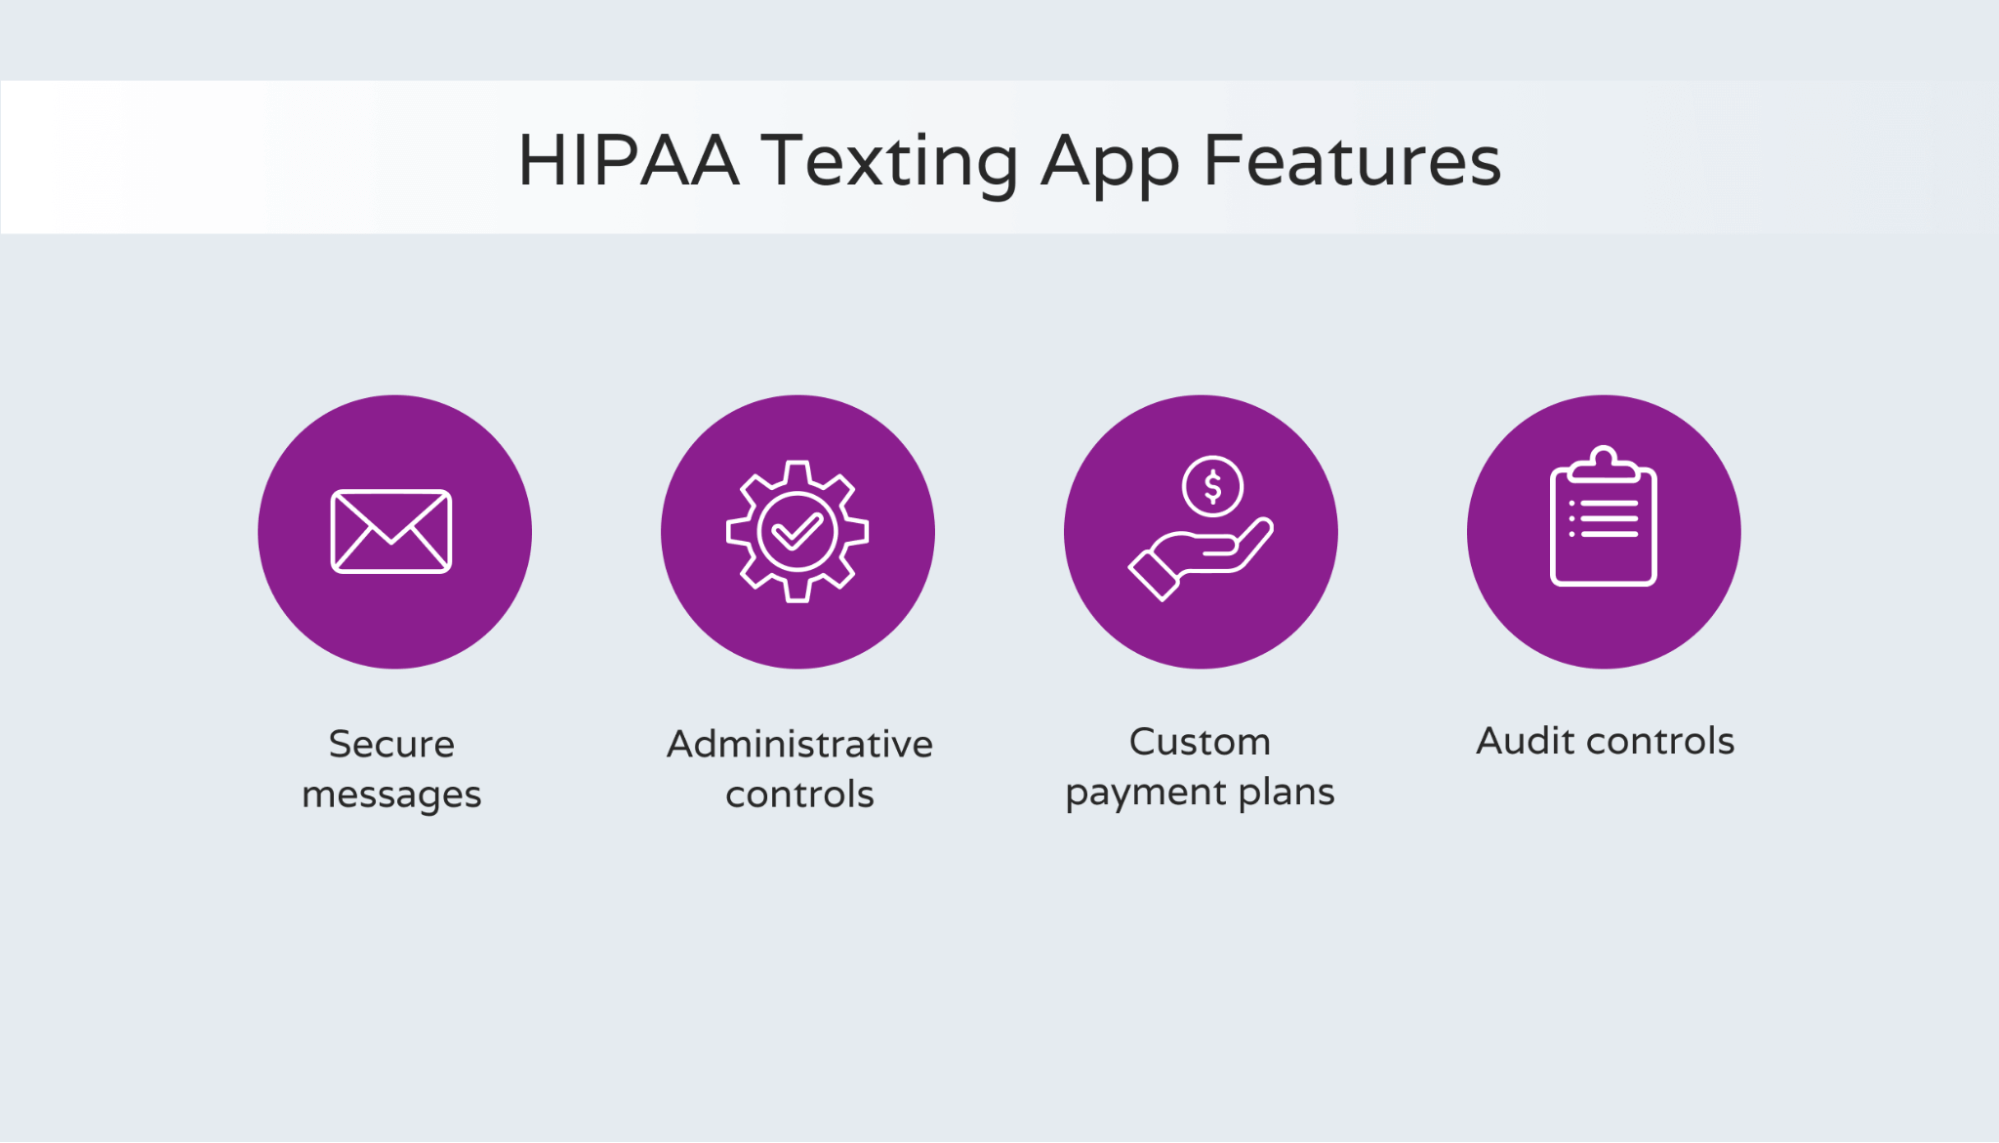 HIPAA texting app features